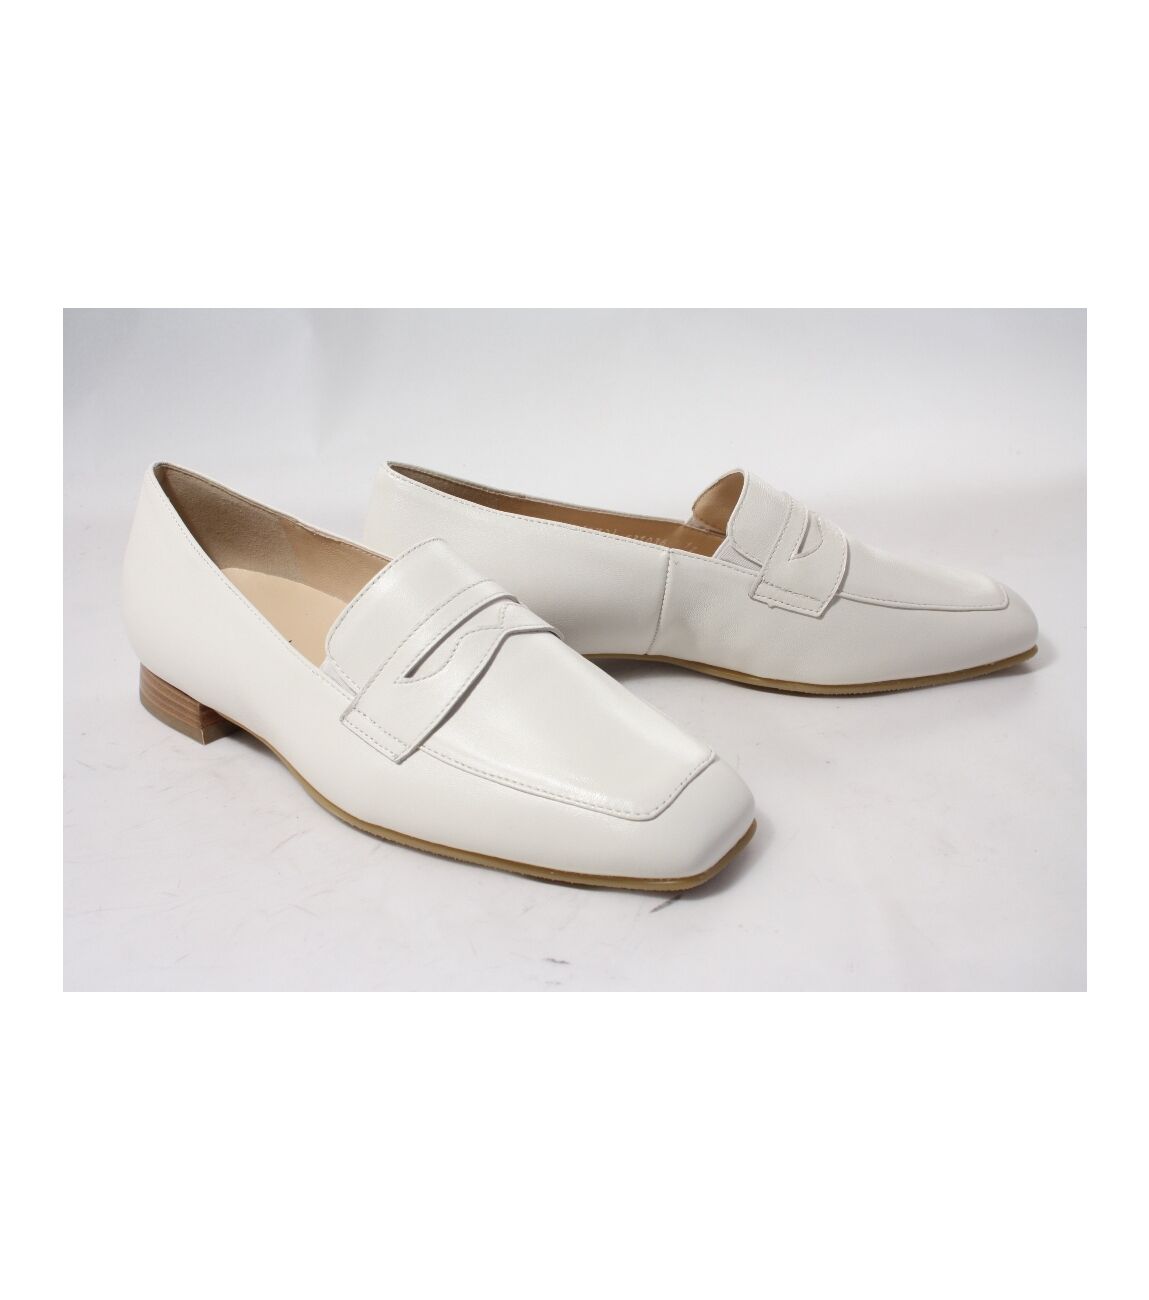 Hassia Napoli Loafers - Instappers - Dames - Wit - Maat 38